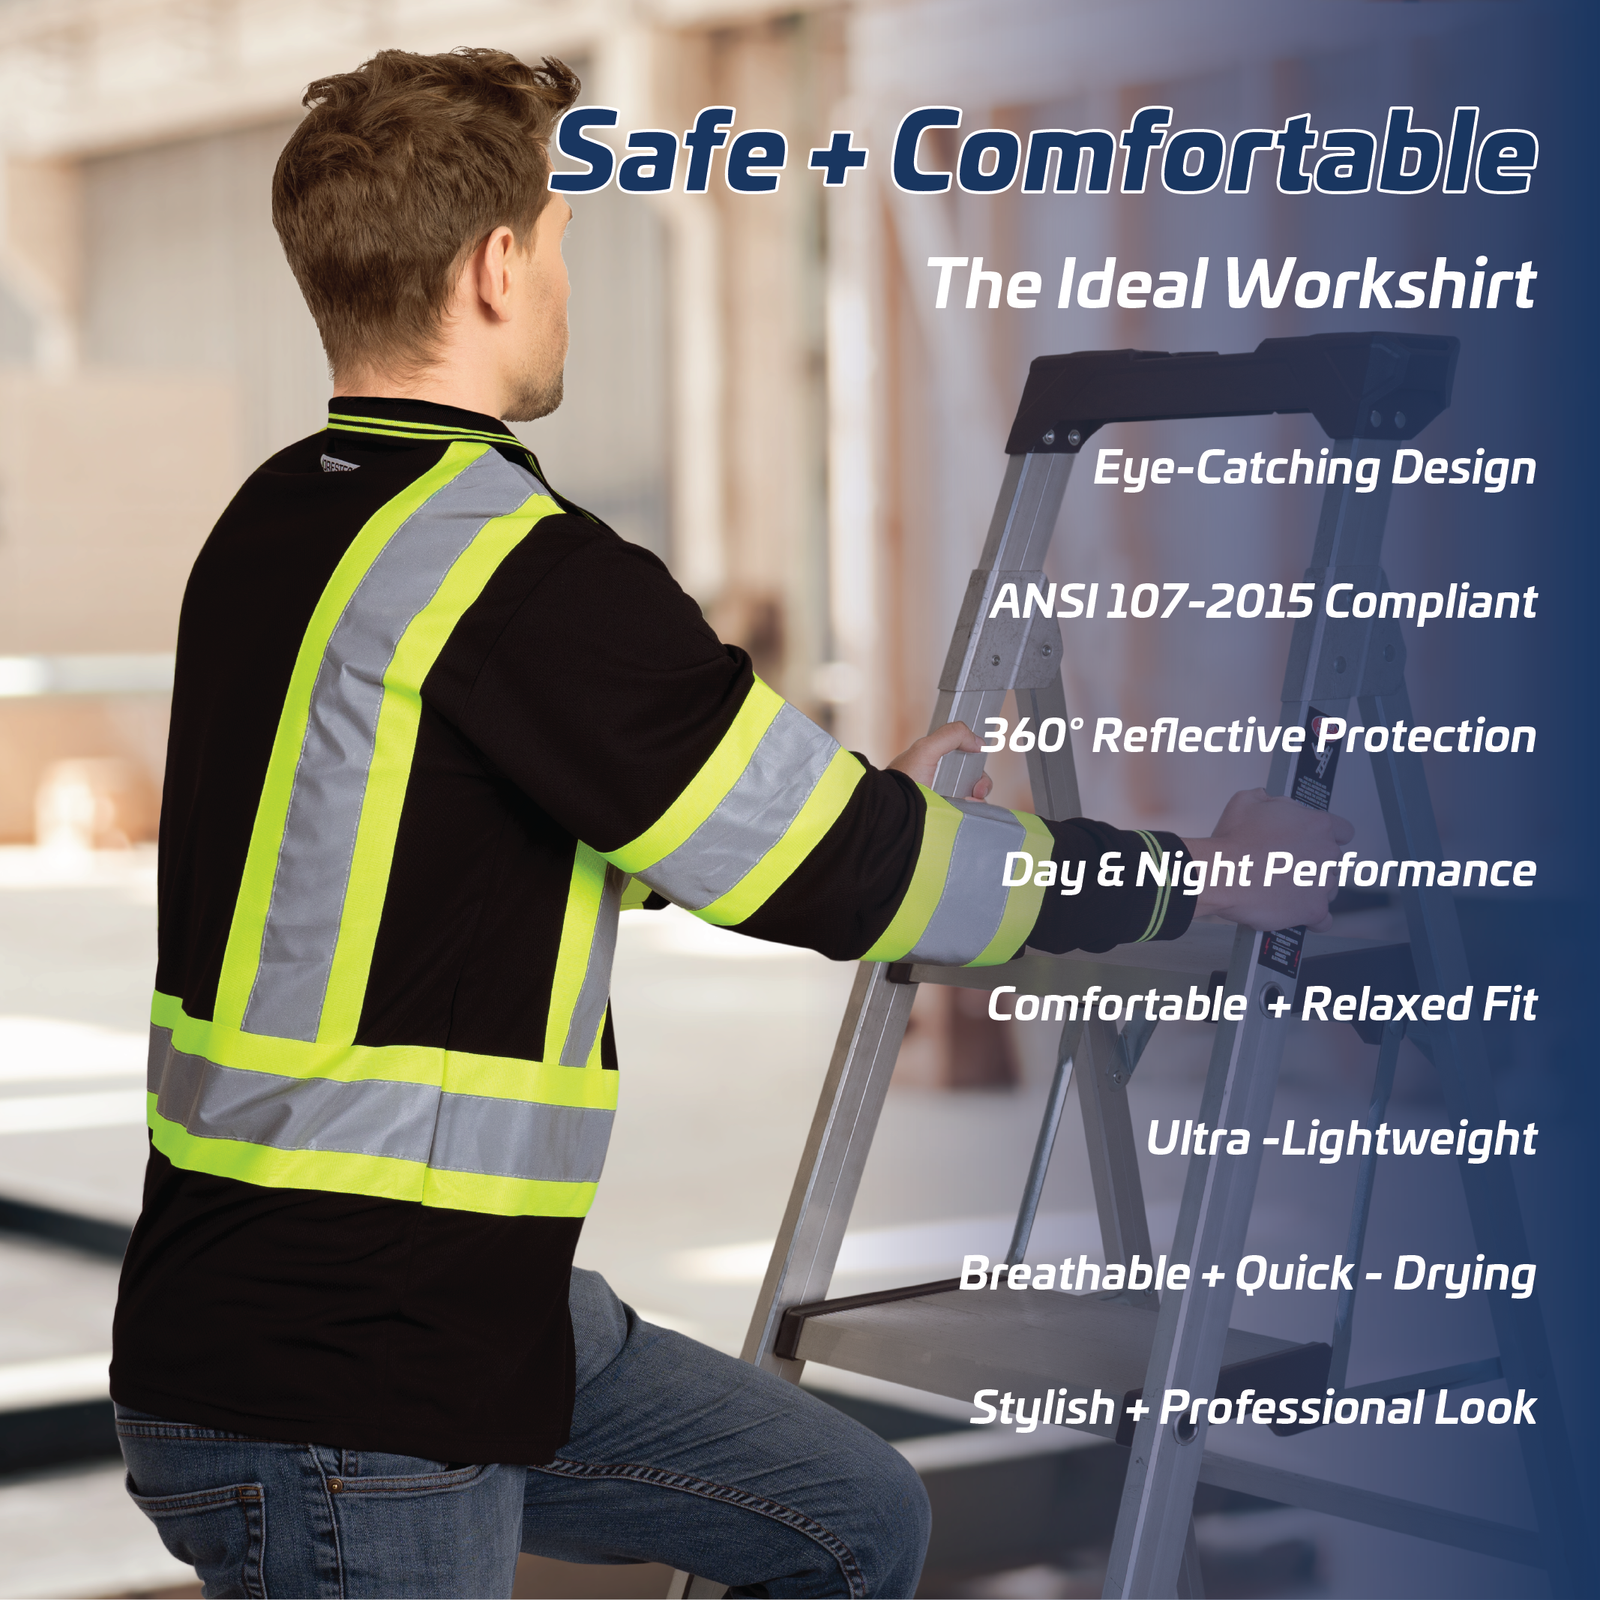 Worker wearing the black safety long sleeve polo shirt with reflective strips. Text reads: Safe and comfortable, ideal work shirt, eye catching design, ANSI ISEA compliant, 360 reflective protection, day and night performance, relaxed fit shirt, ultra lightweight, breathable, quick drying, stylish professional look